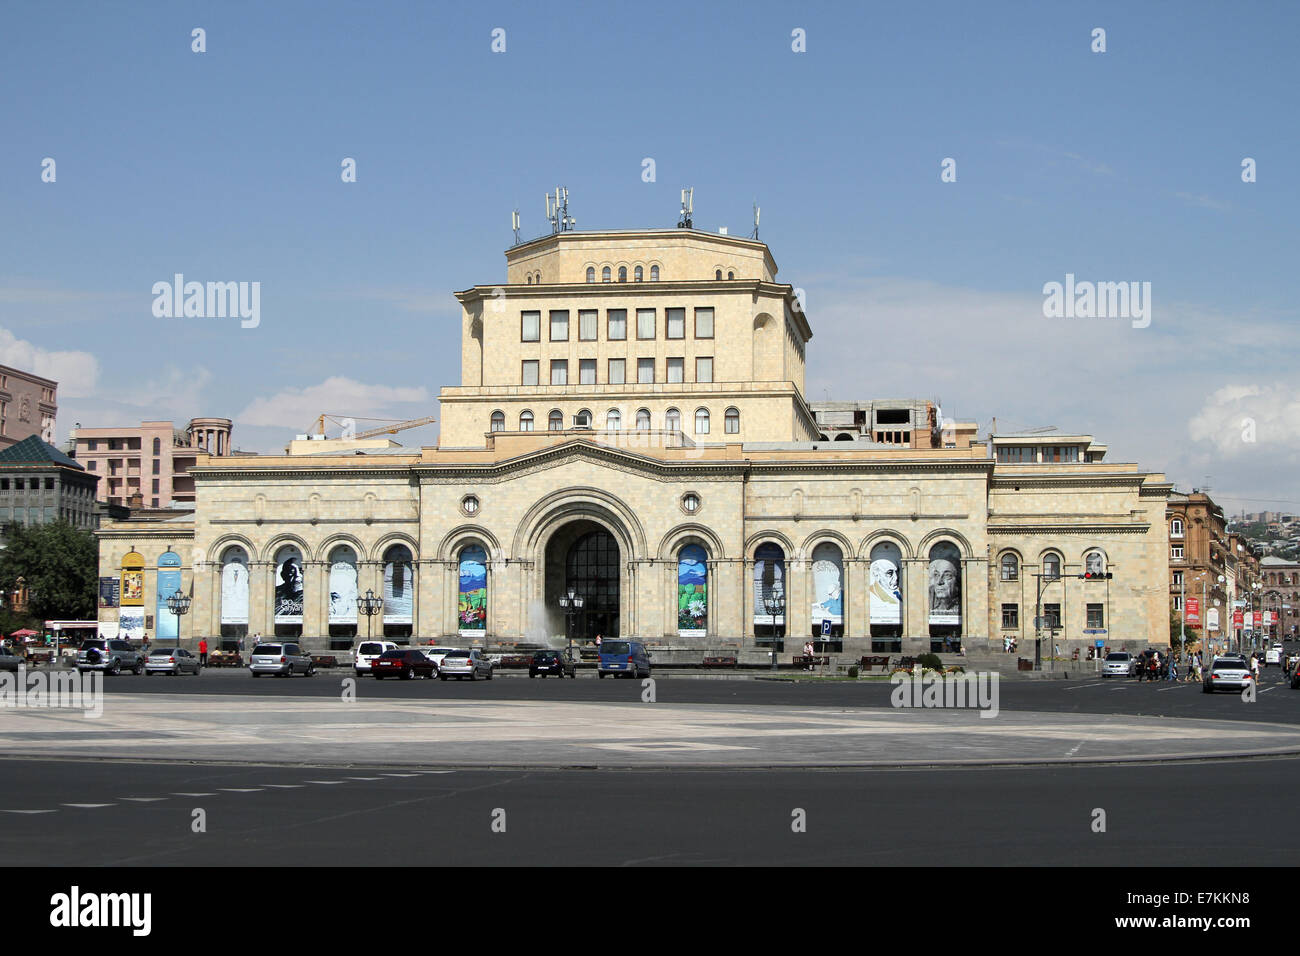 The National Gallery of Armenia and the History Museum of Armenia on Republic Square in Yerevan, Armenia Stock Photo